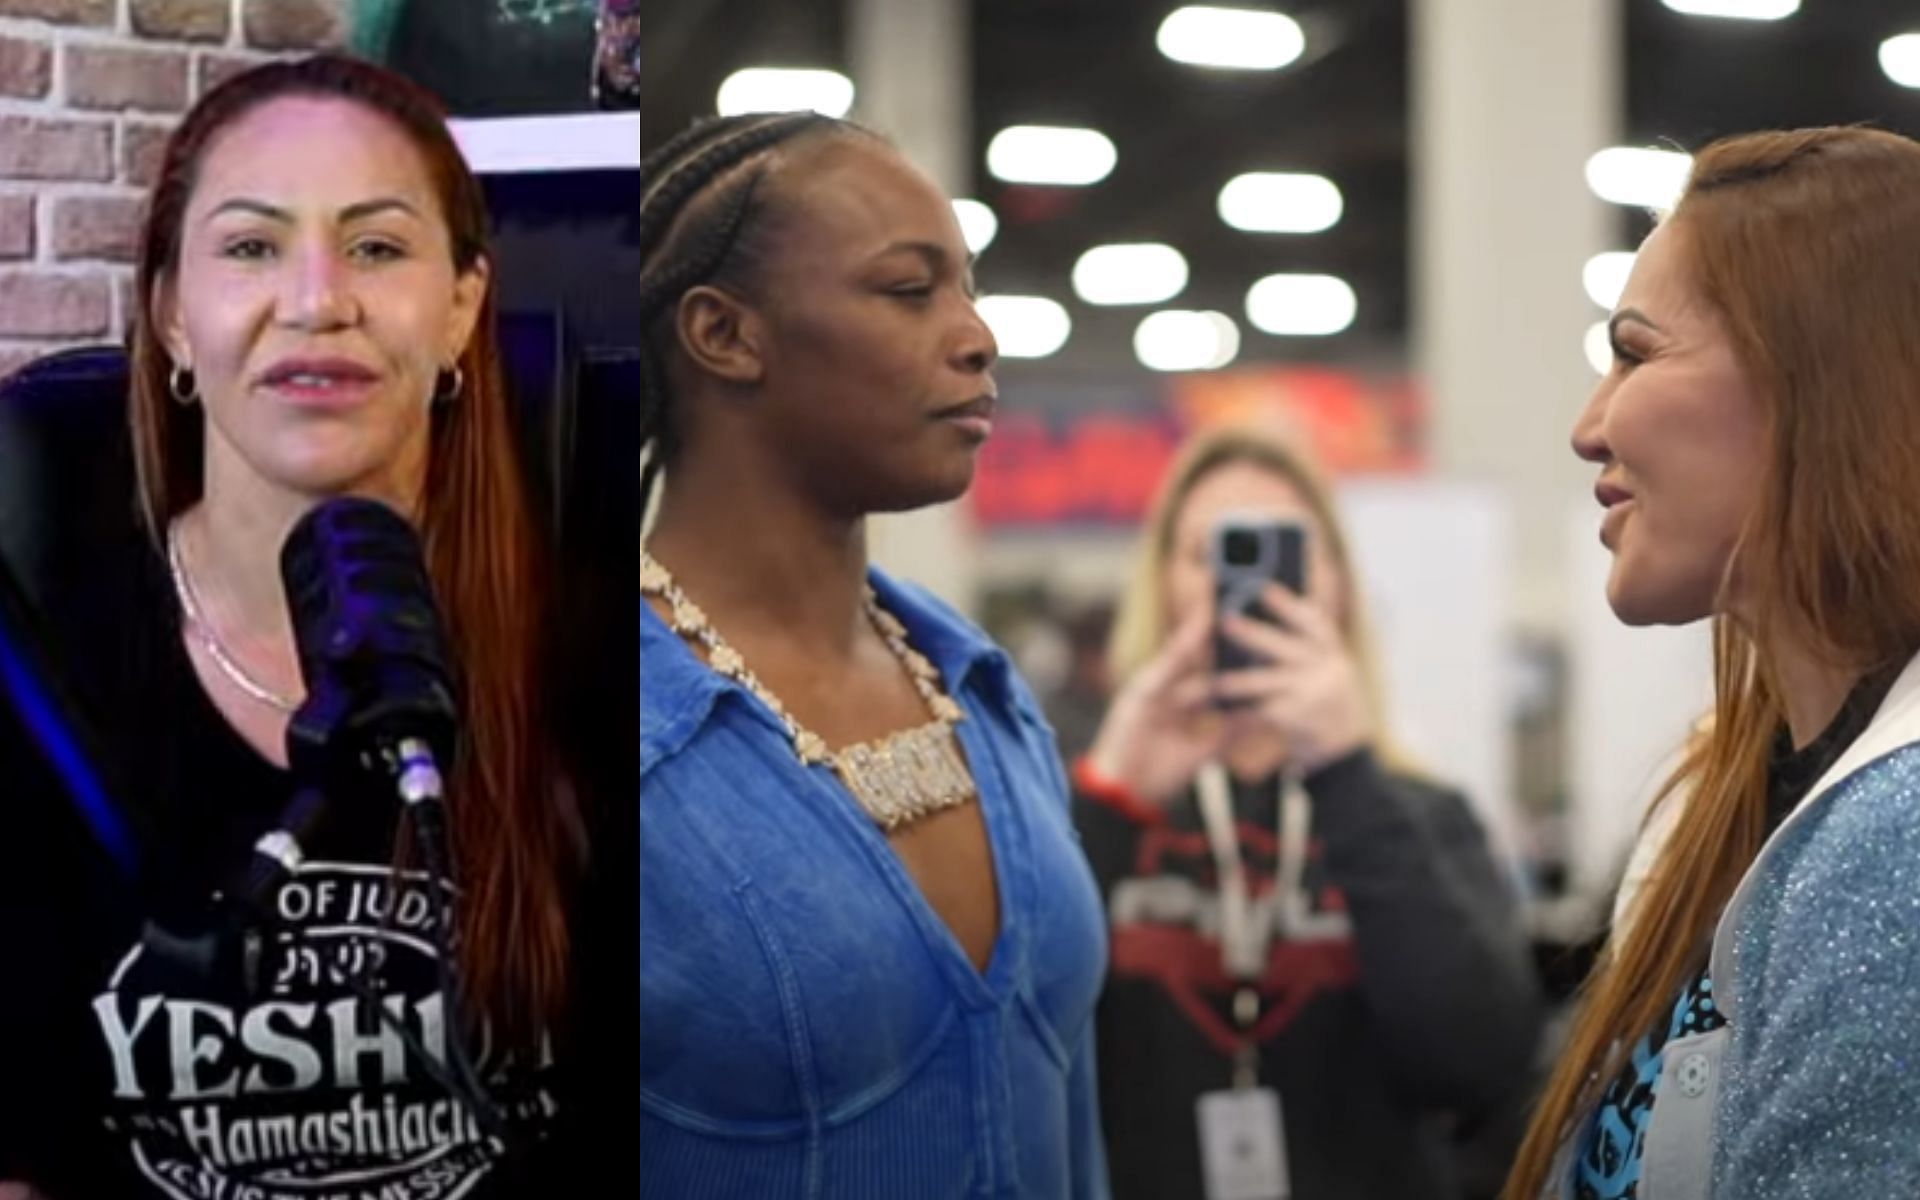 Cris Cyborg confident she would defeat Claressa Shields in boxing [Image courtesy: Cris Cyborg - YouTube]